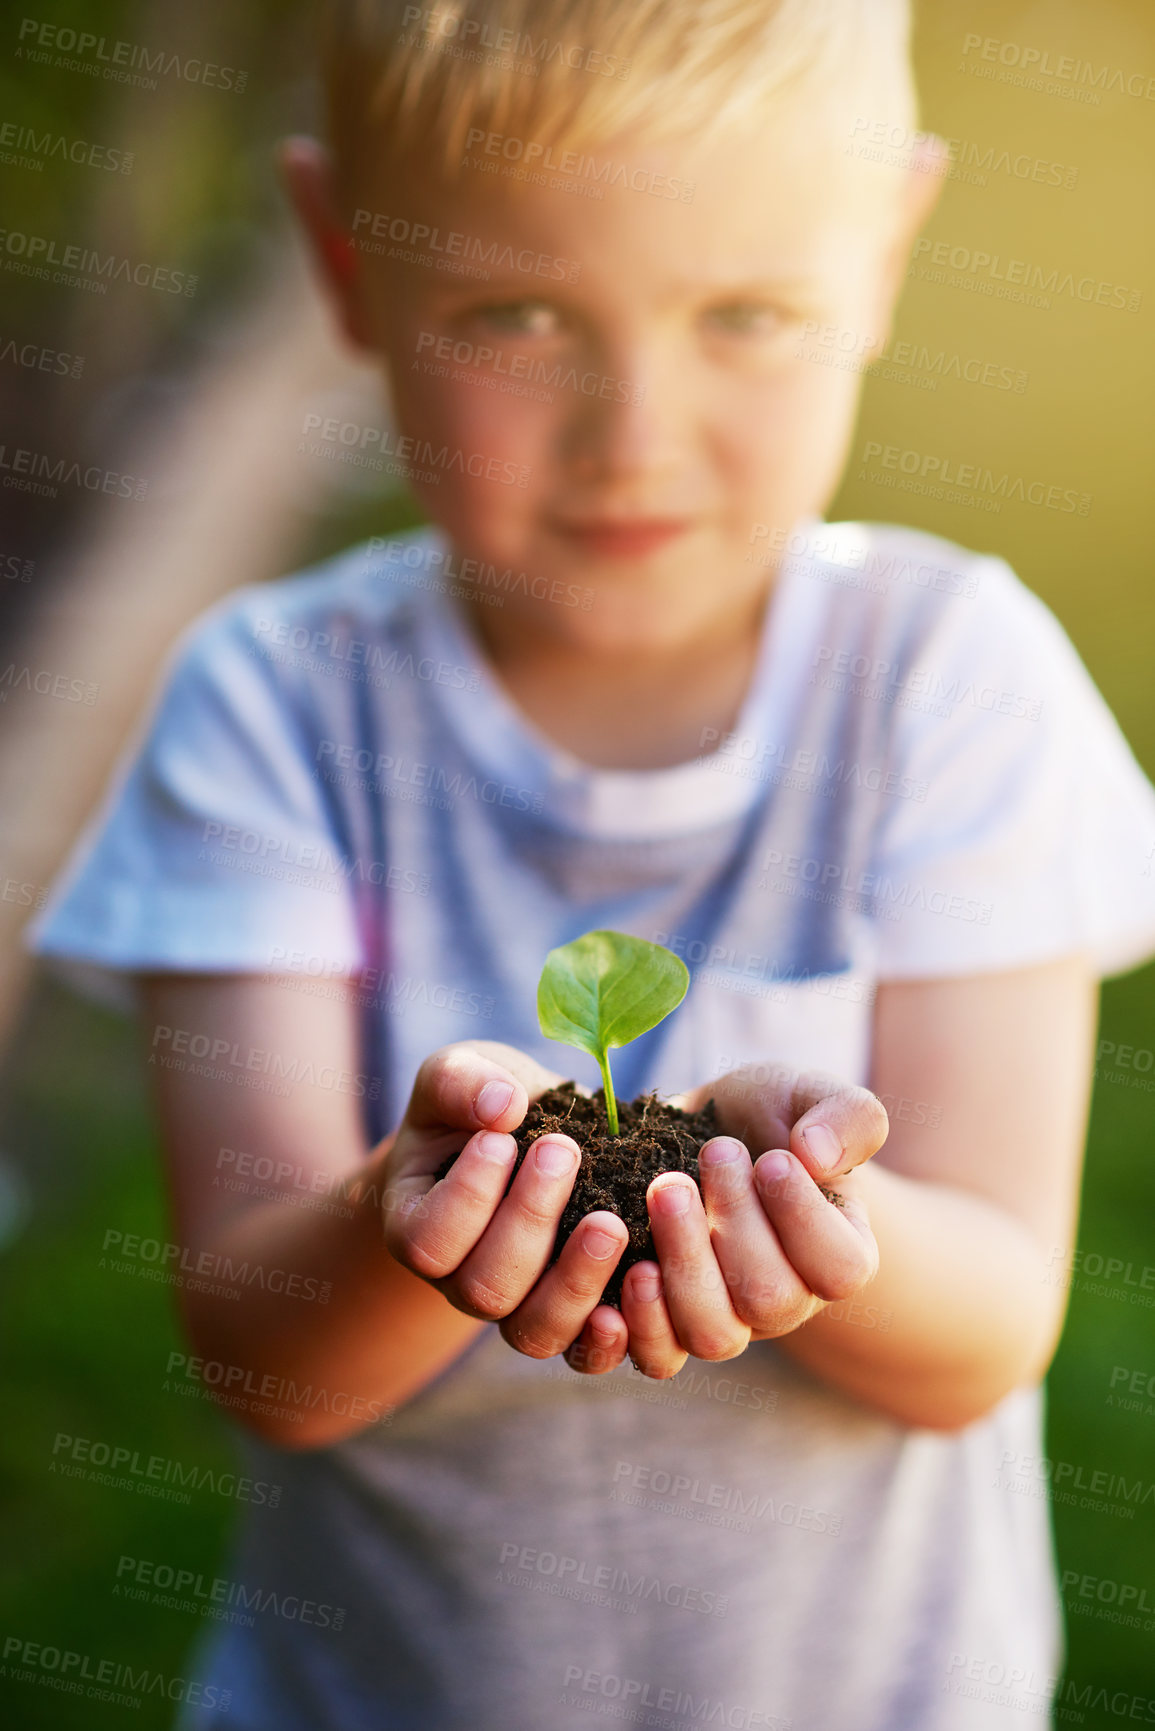 Buy stock photo Portrait of a little boy holding a plant growing out of soil